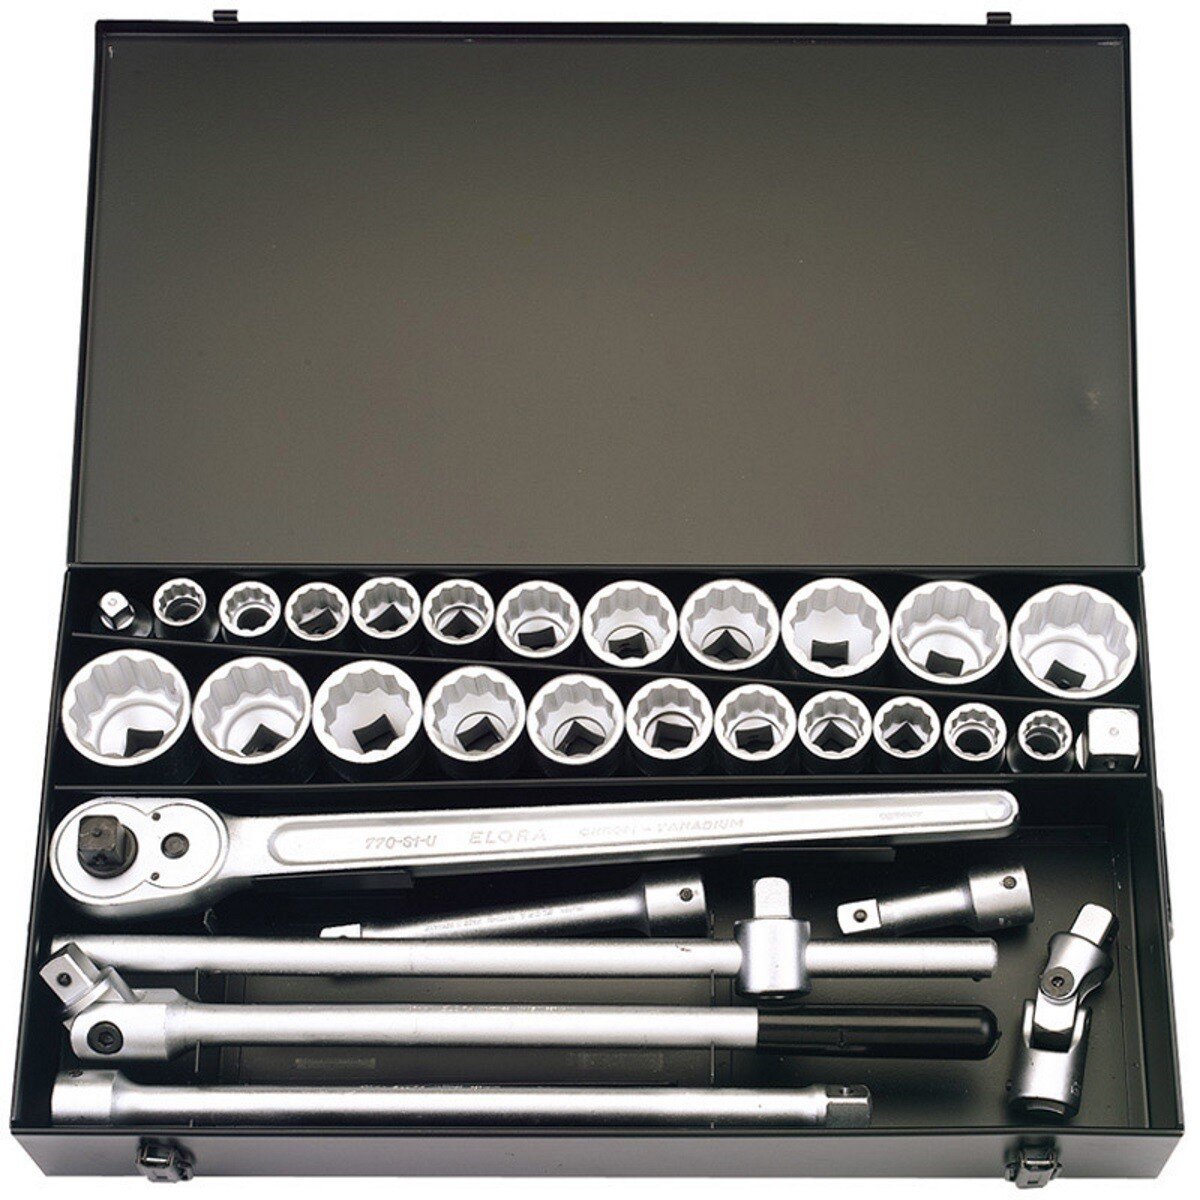 Elora 770-S22 MAU 31 Piece 3/4" Square Drive Metric and Imperial Socket Set 00335